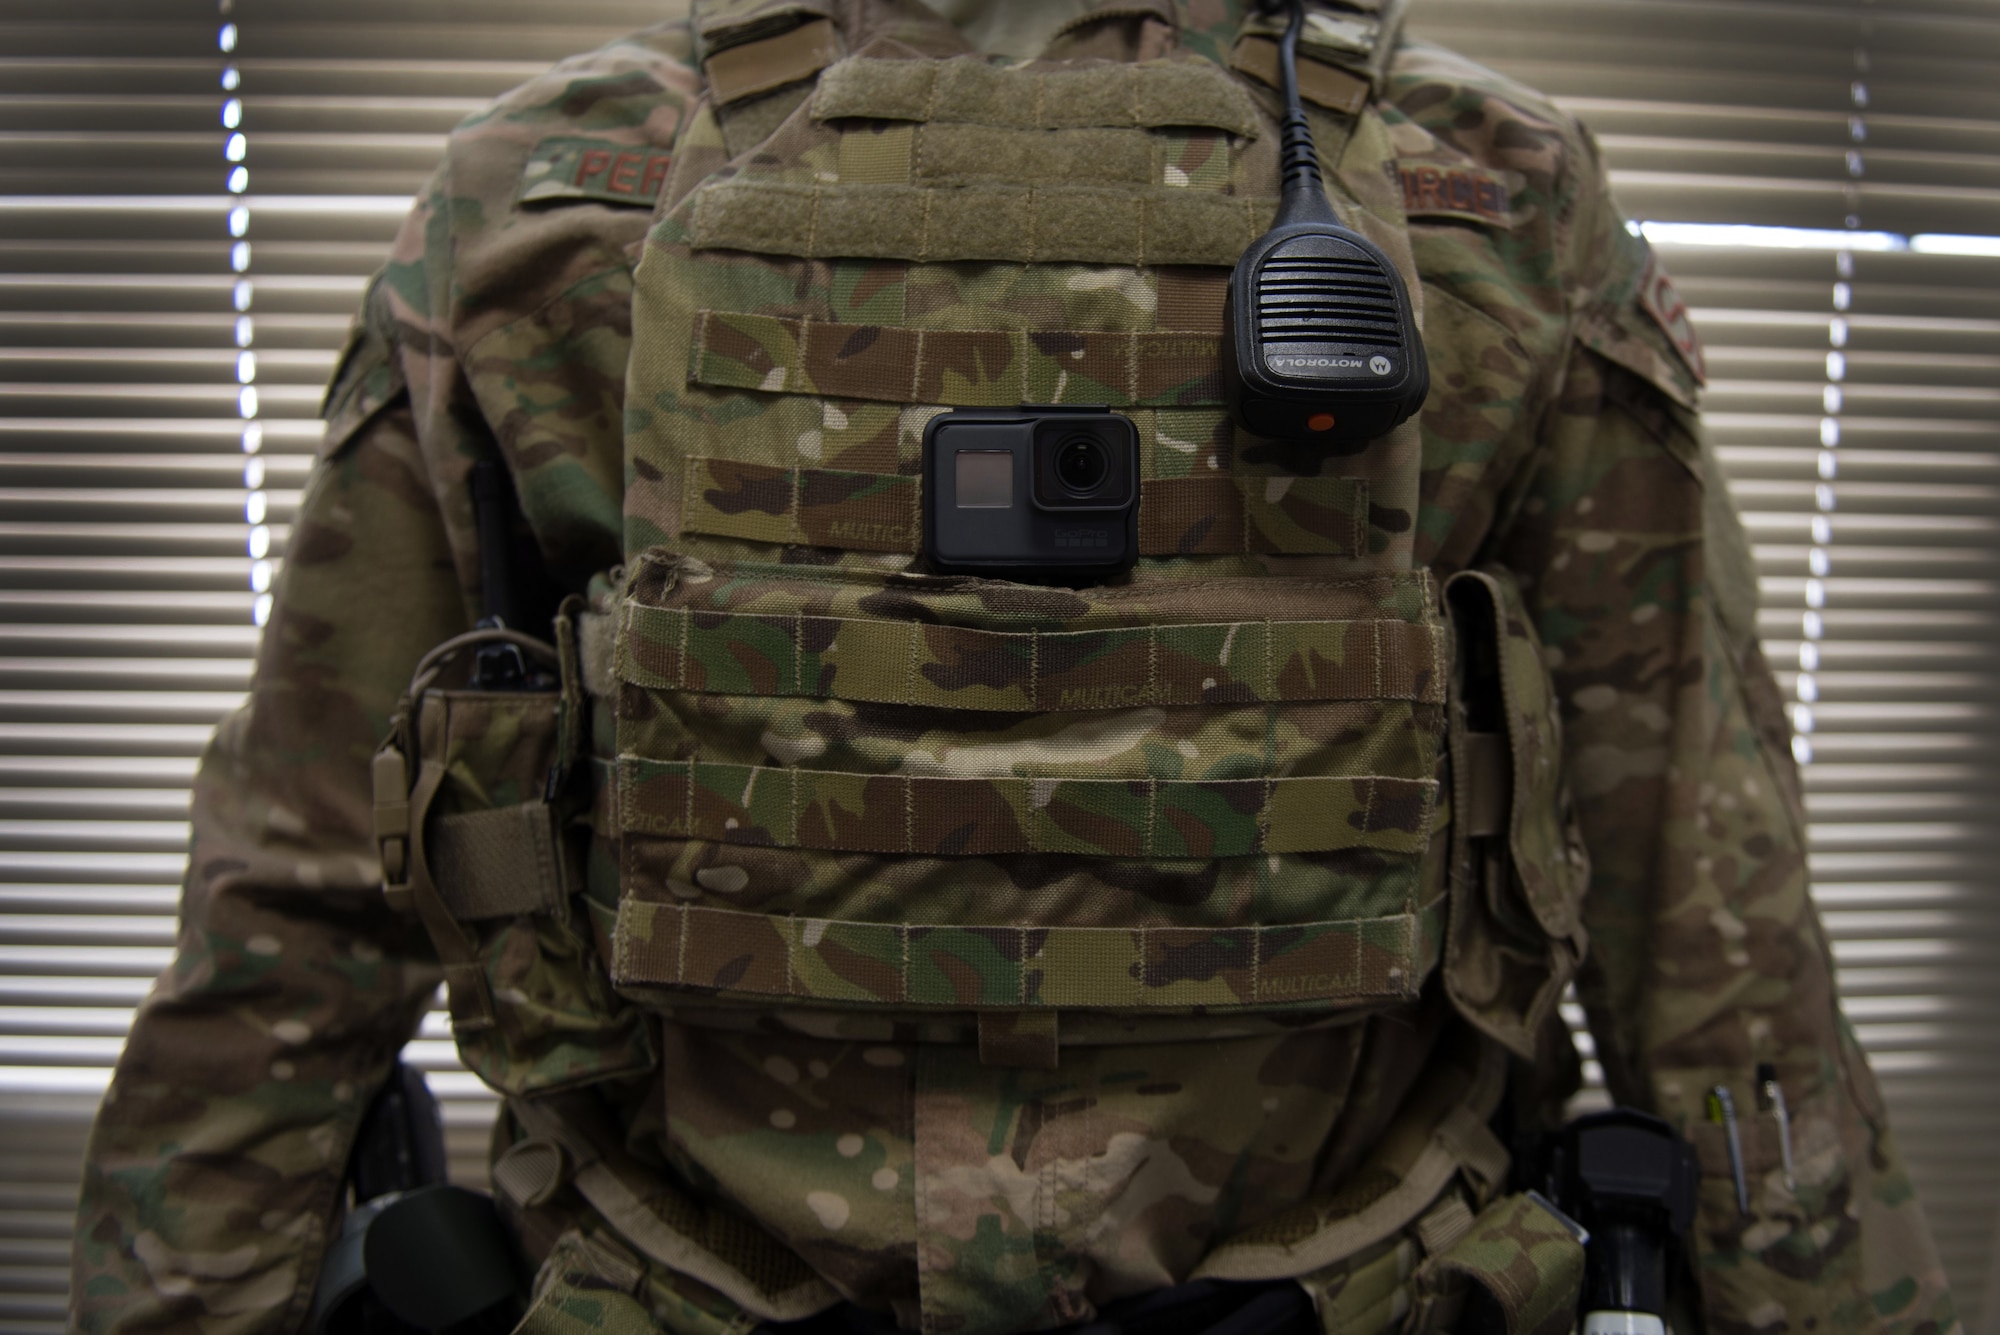 A 55th Security Forces Squadron member displays a action camera on his vest Jan. 31, 2019, on Offutt Air Force Base, Nebraska. The defenders recently purchased several cameras in order to improve training and readiness. (U.S. Air Force photo by Tech. Sgt. Rachelle Blake)